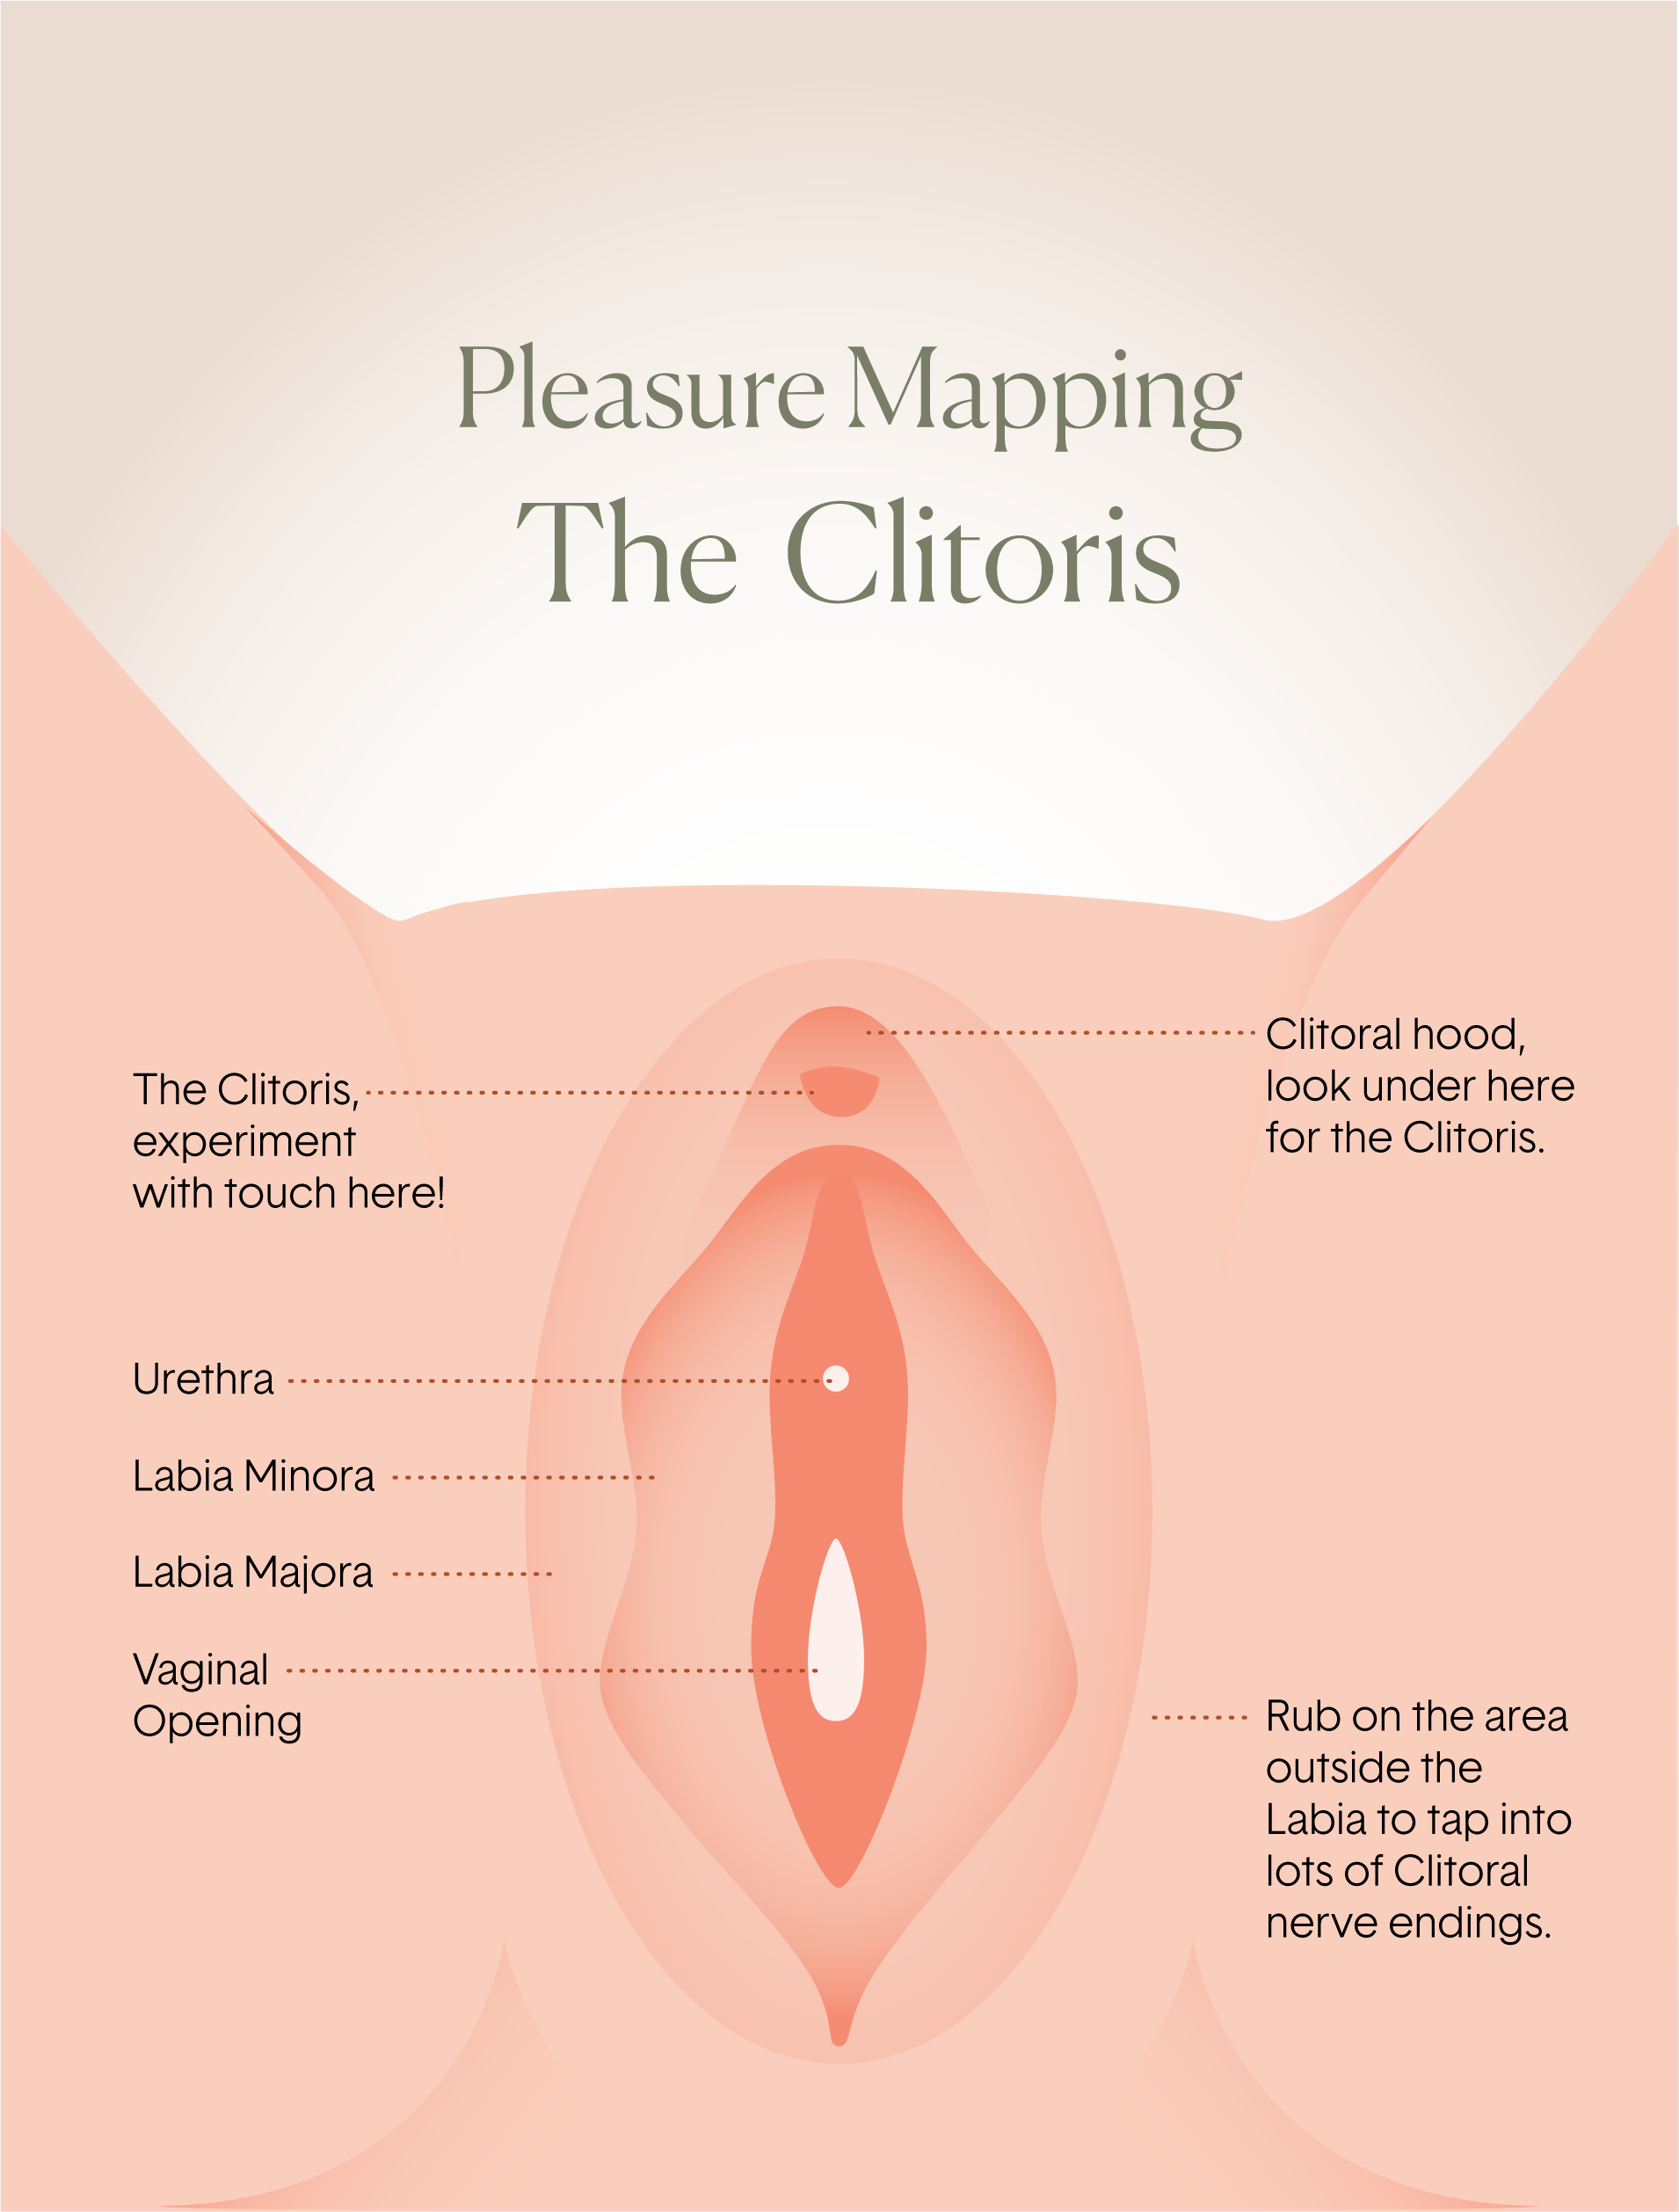 Where is the Clitoris? image